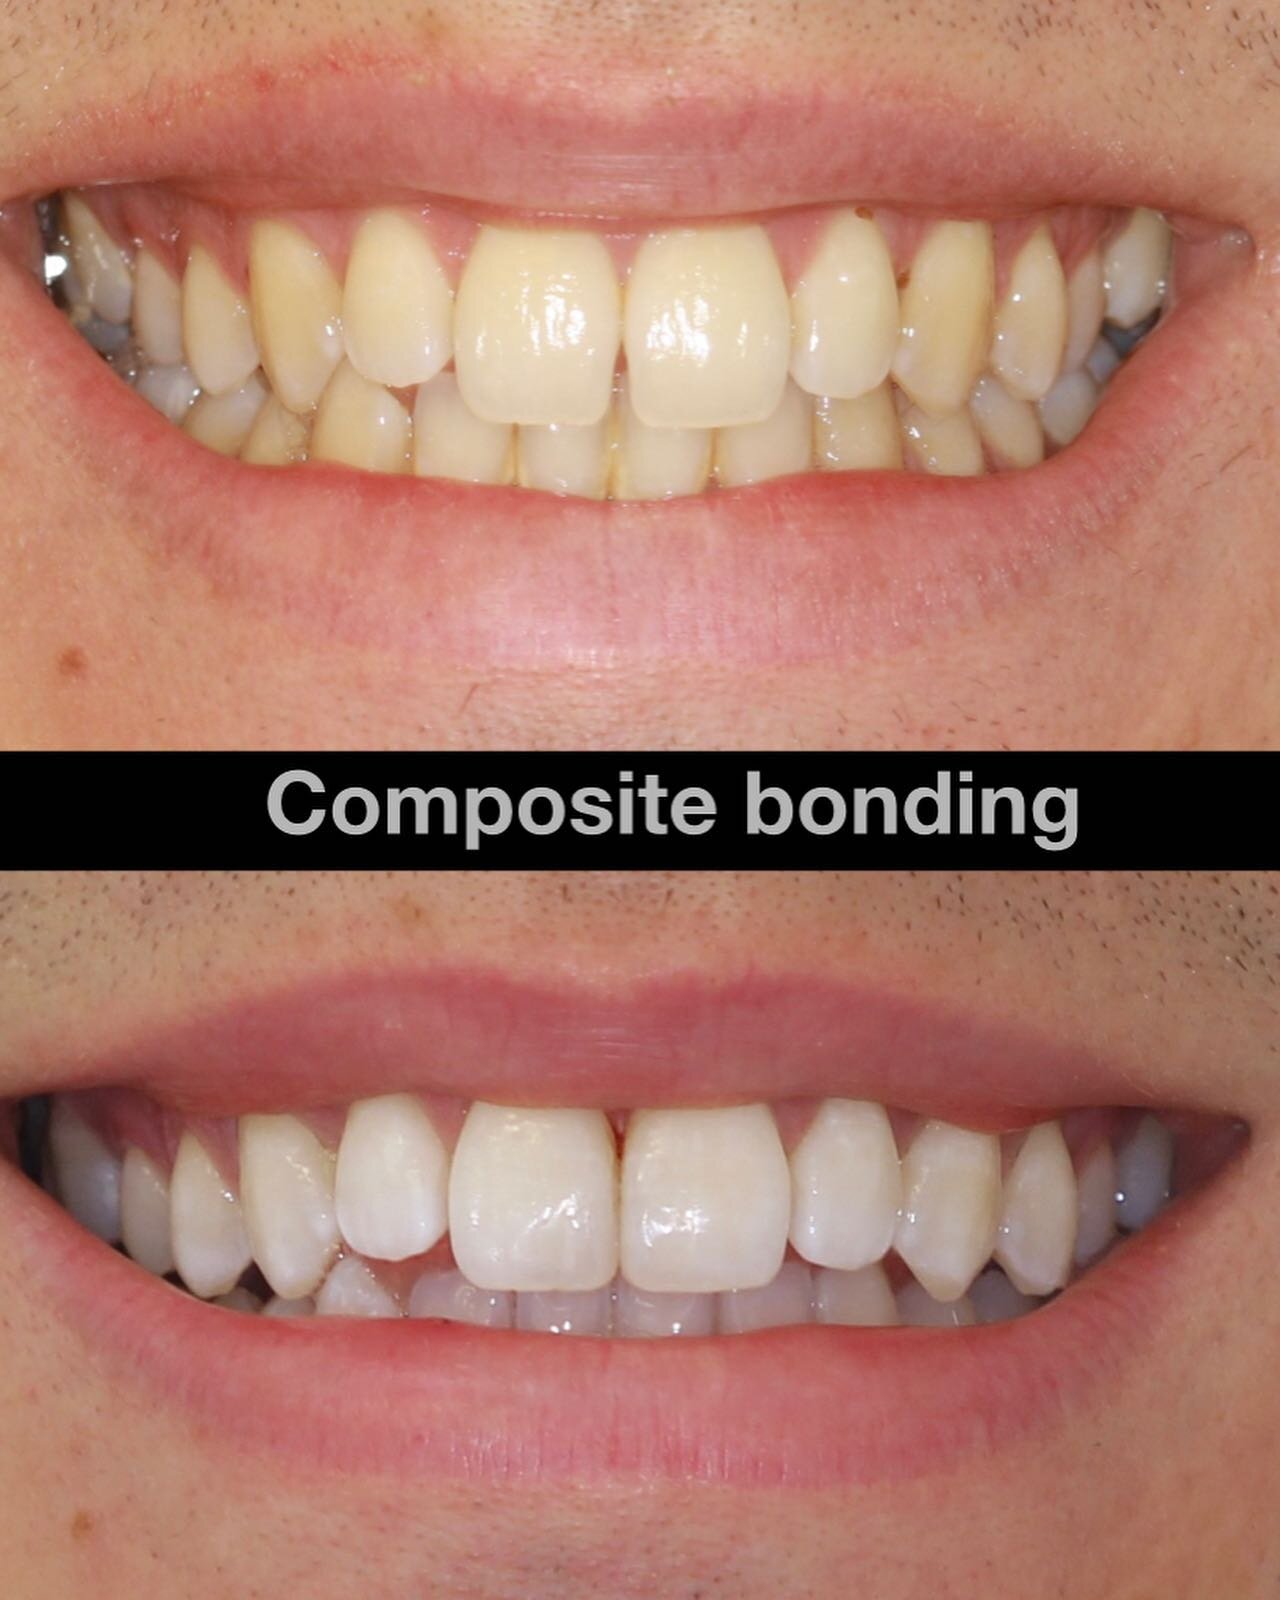 Sometimes it&rsquo;s the small change that can make a big impact. After the whitening, the patient needed one more quick appointment to do the composite bonding, and left happy, ready to show off his smile! 
.
.
.
#compositebonding #closethegap #cosm